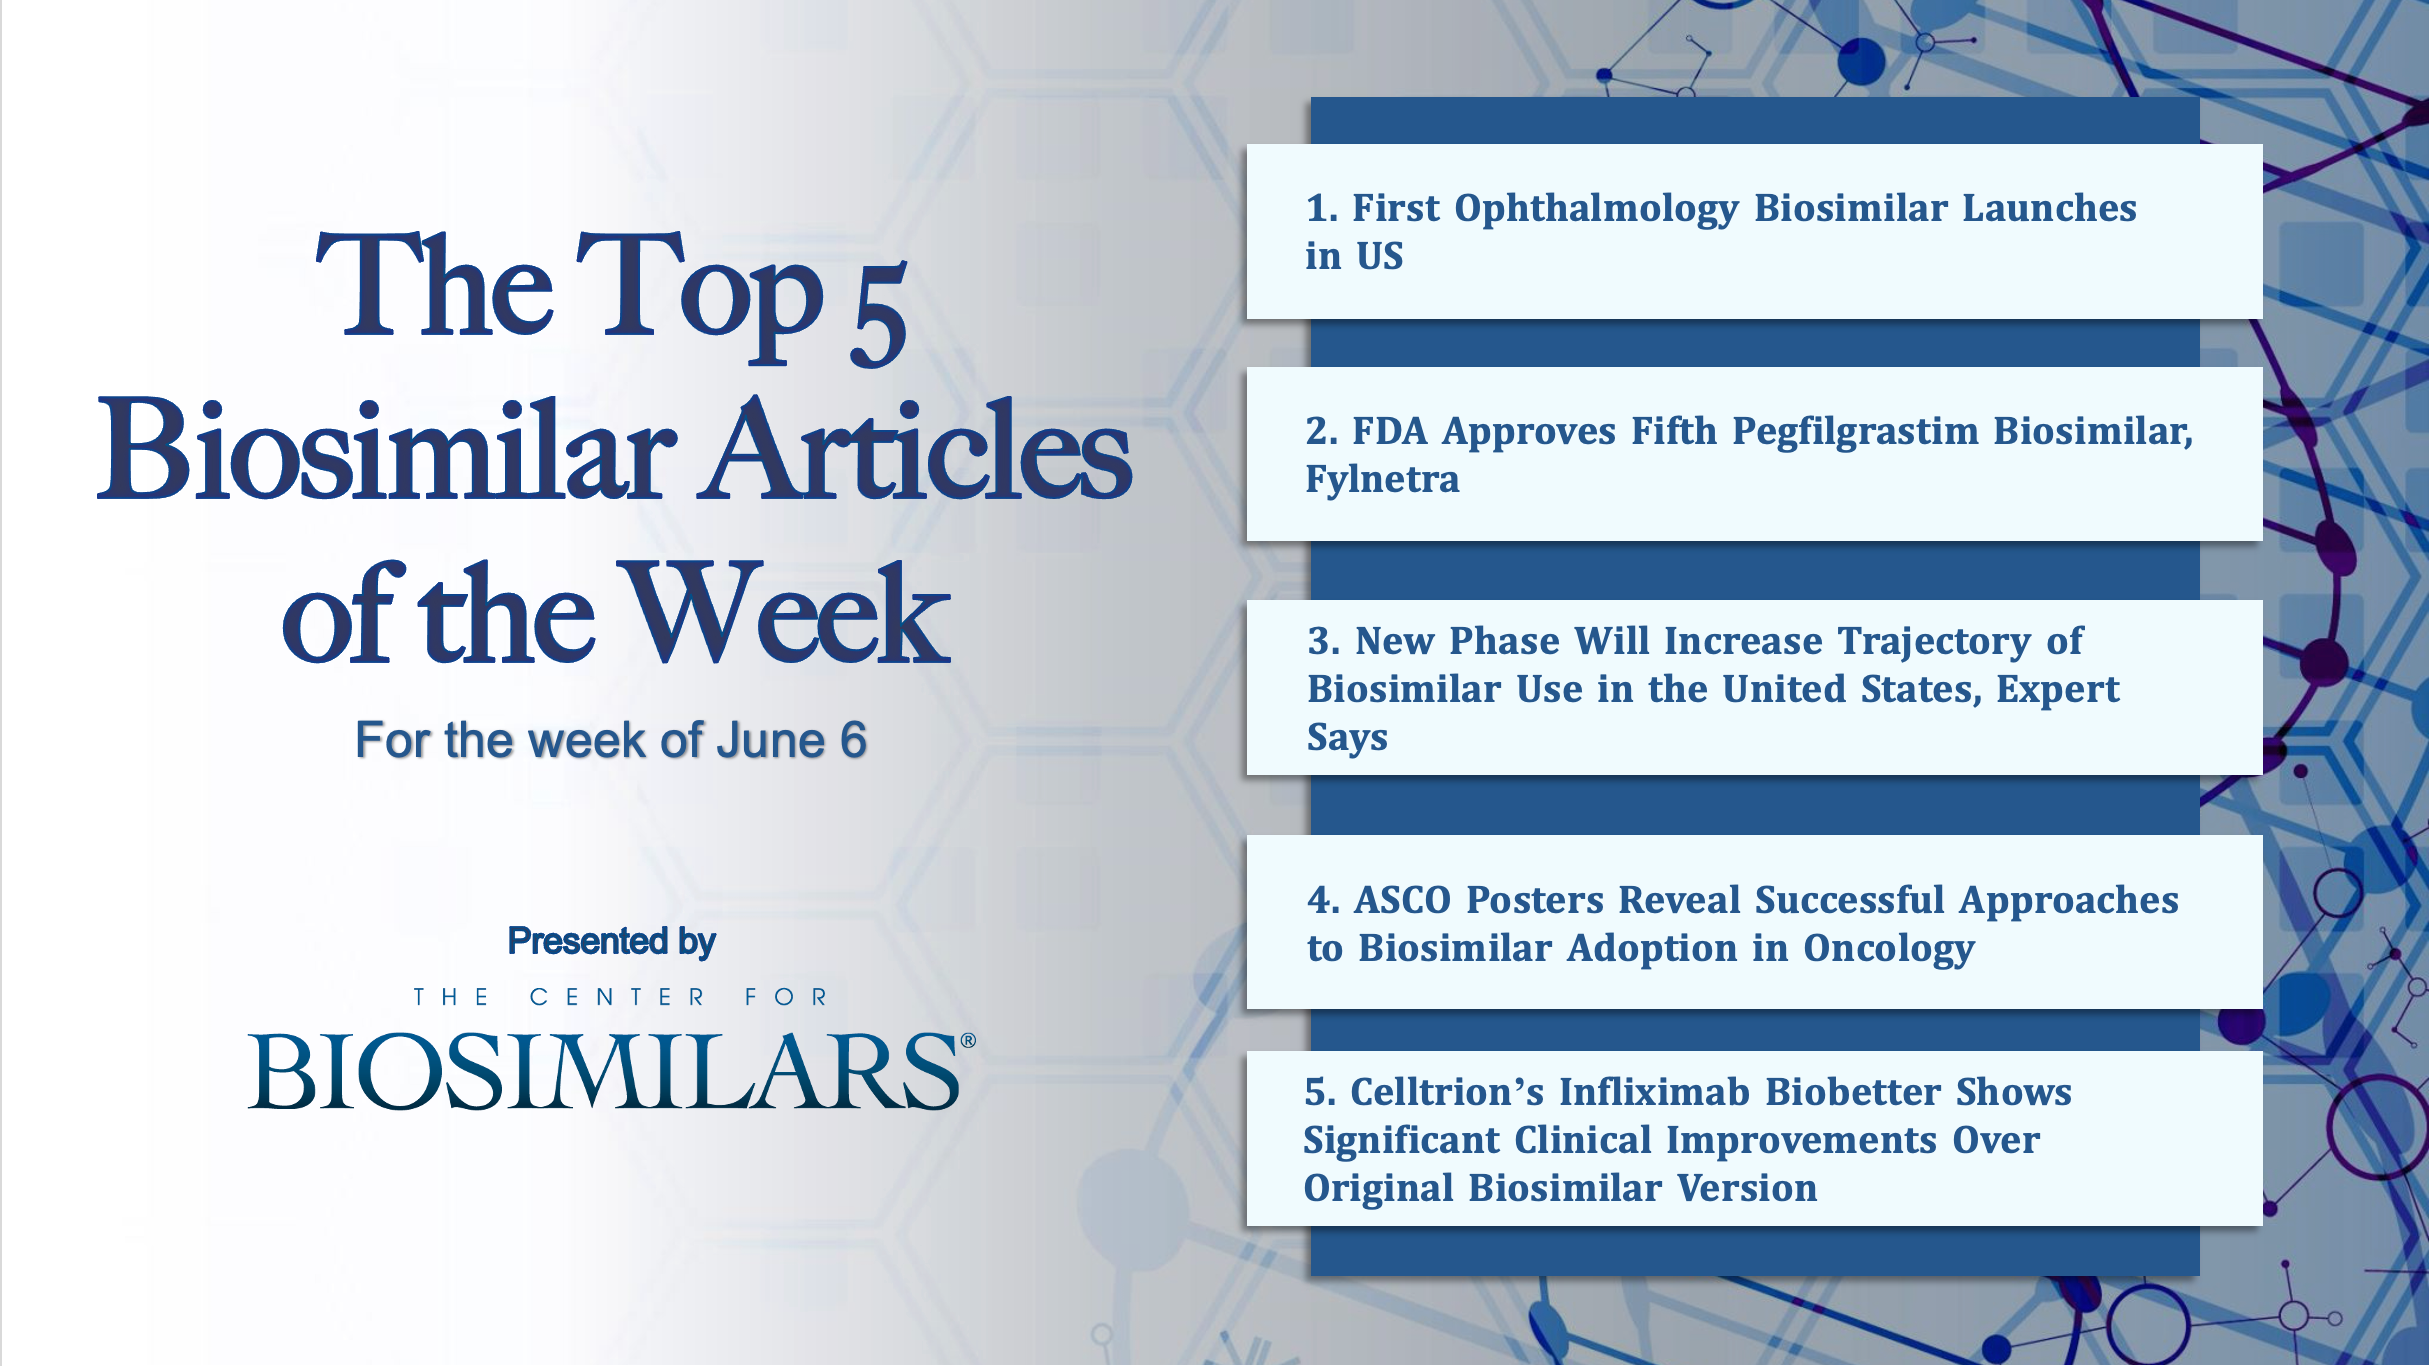 Here are the top 5 biosimilar articles for the week of June 6, 2022.